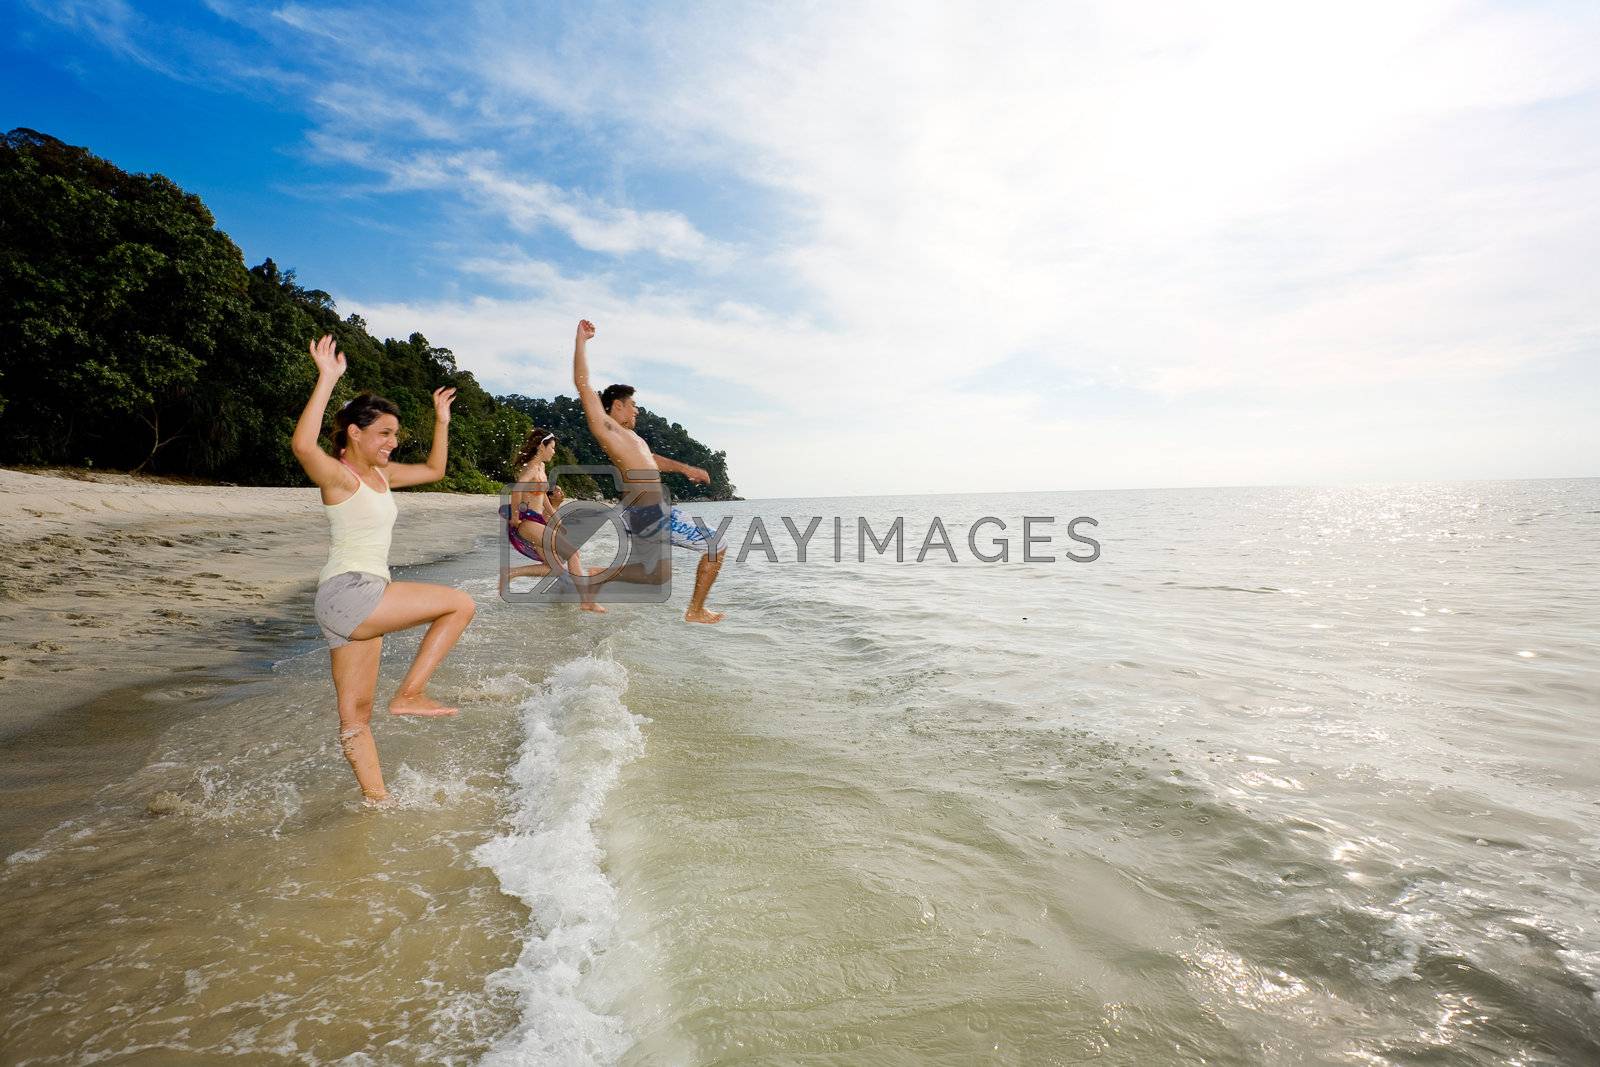 Royalty free image of group of friends having fun by eyedear